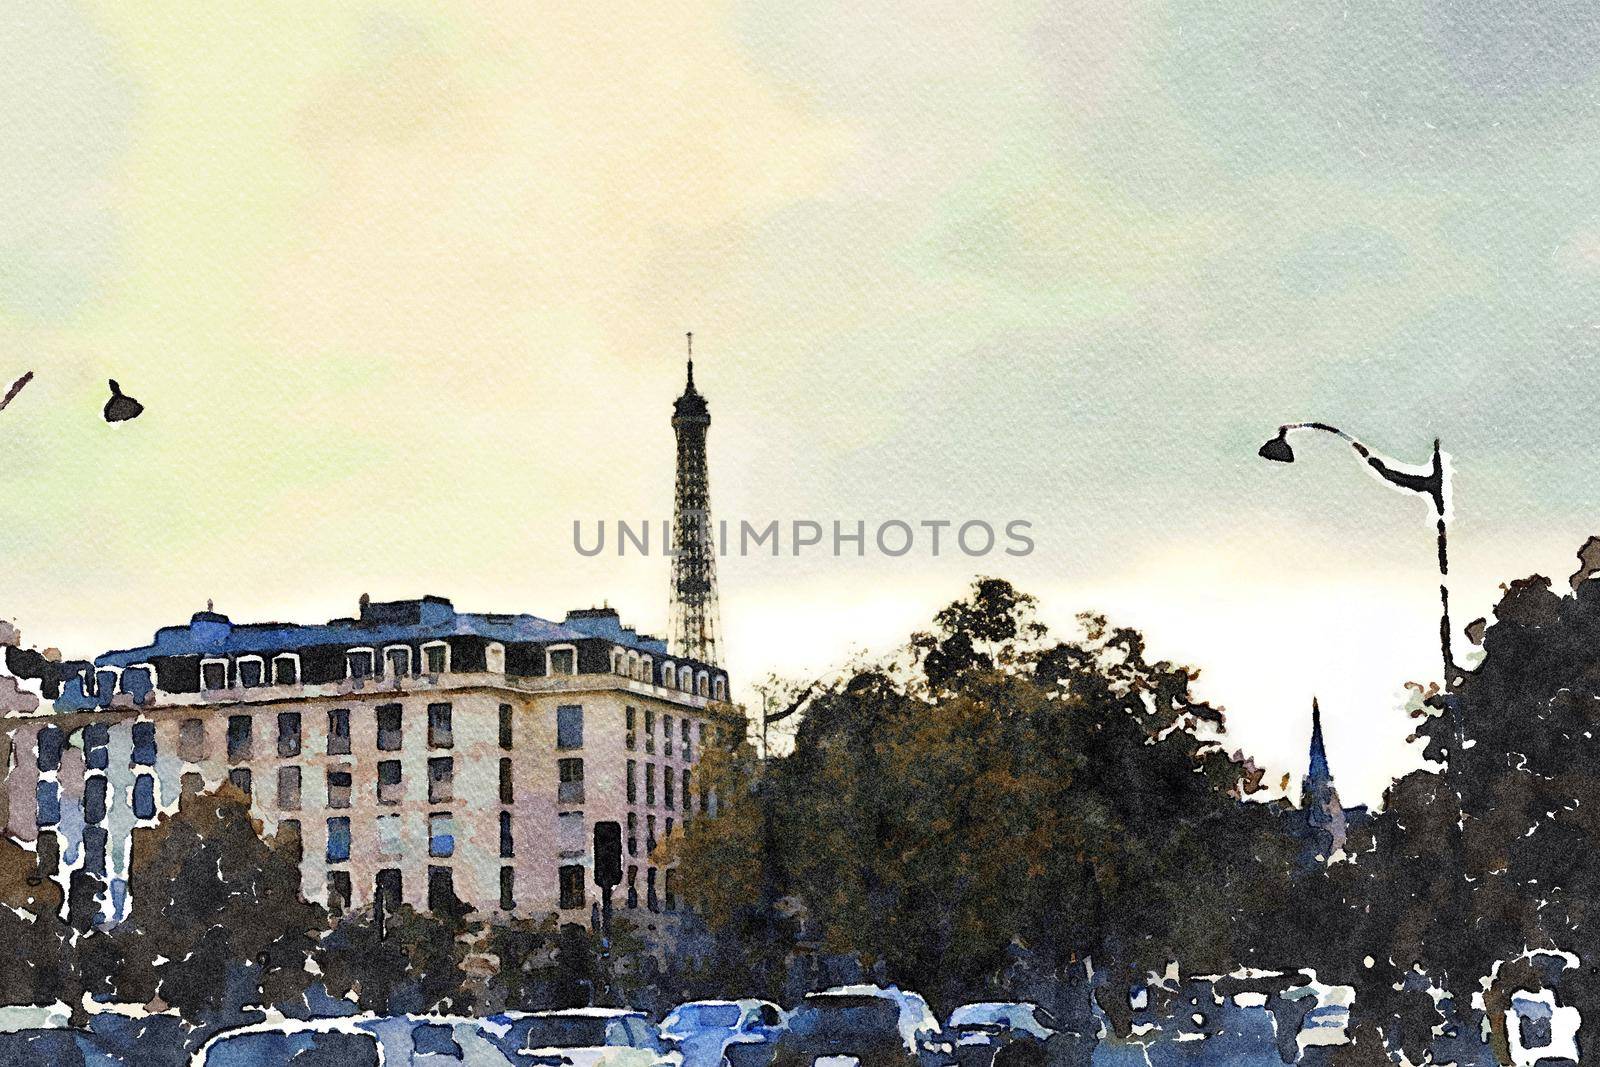 Watercolor representing a glimpse of the Eiffel Tower from a square in Paris in autumn